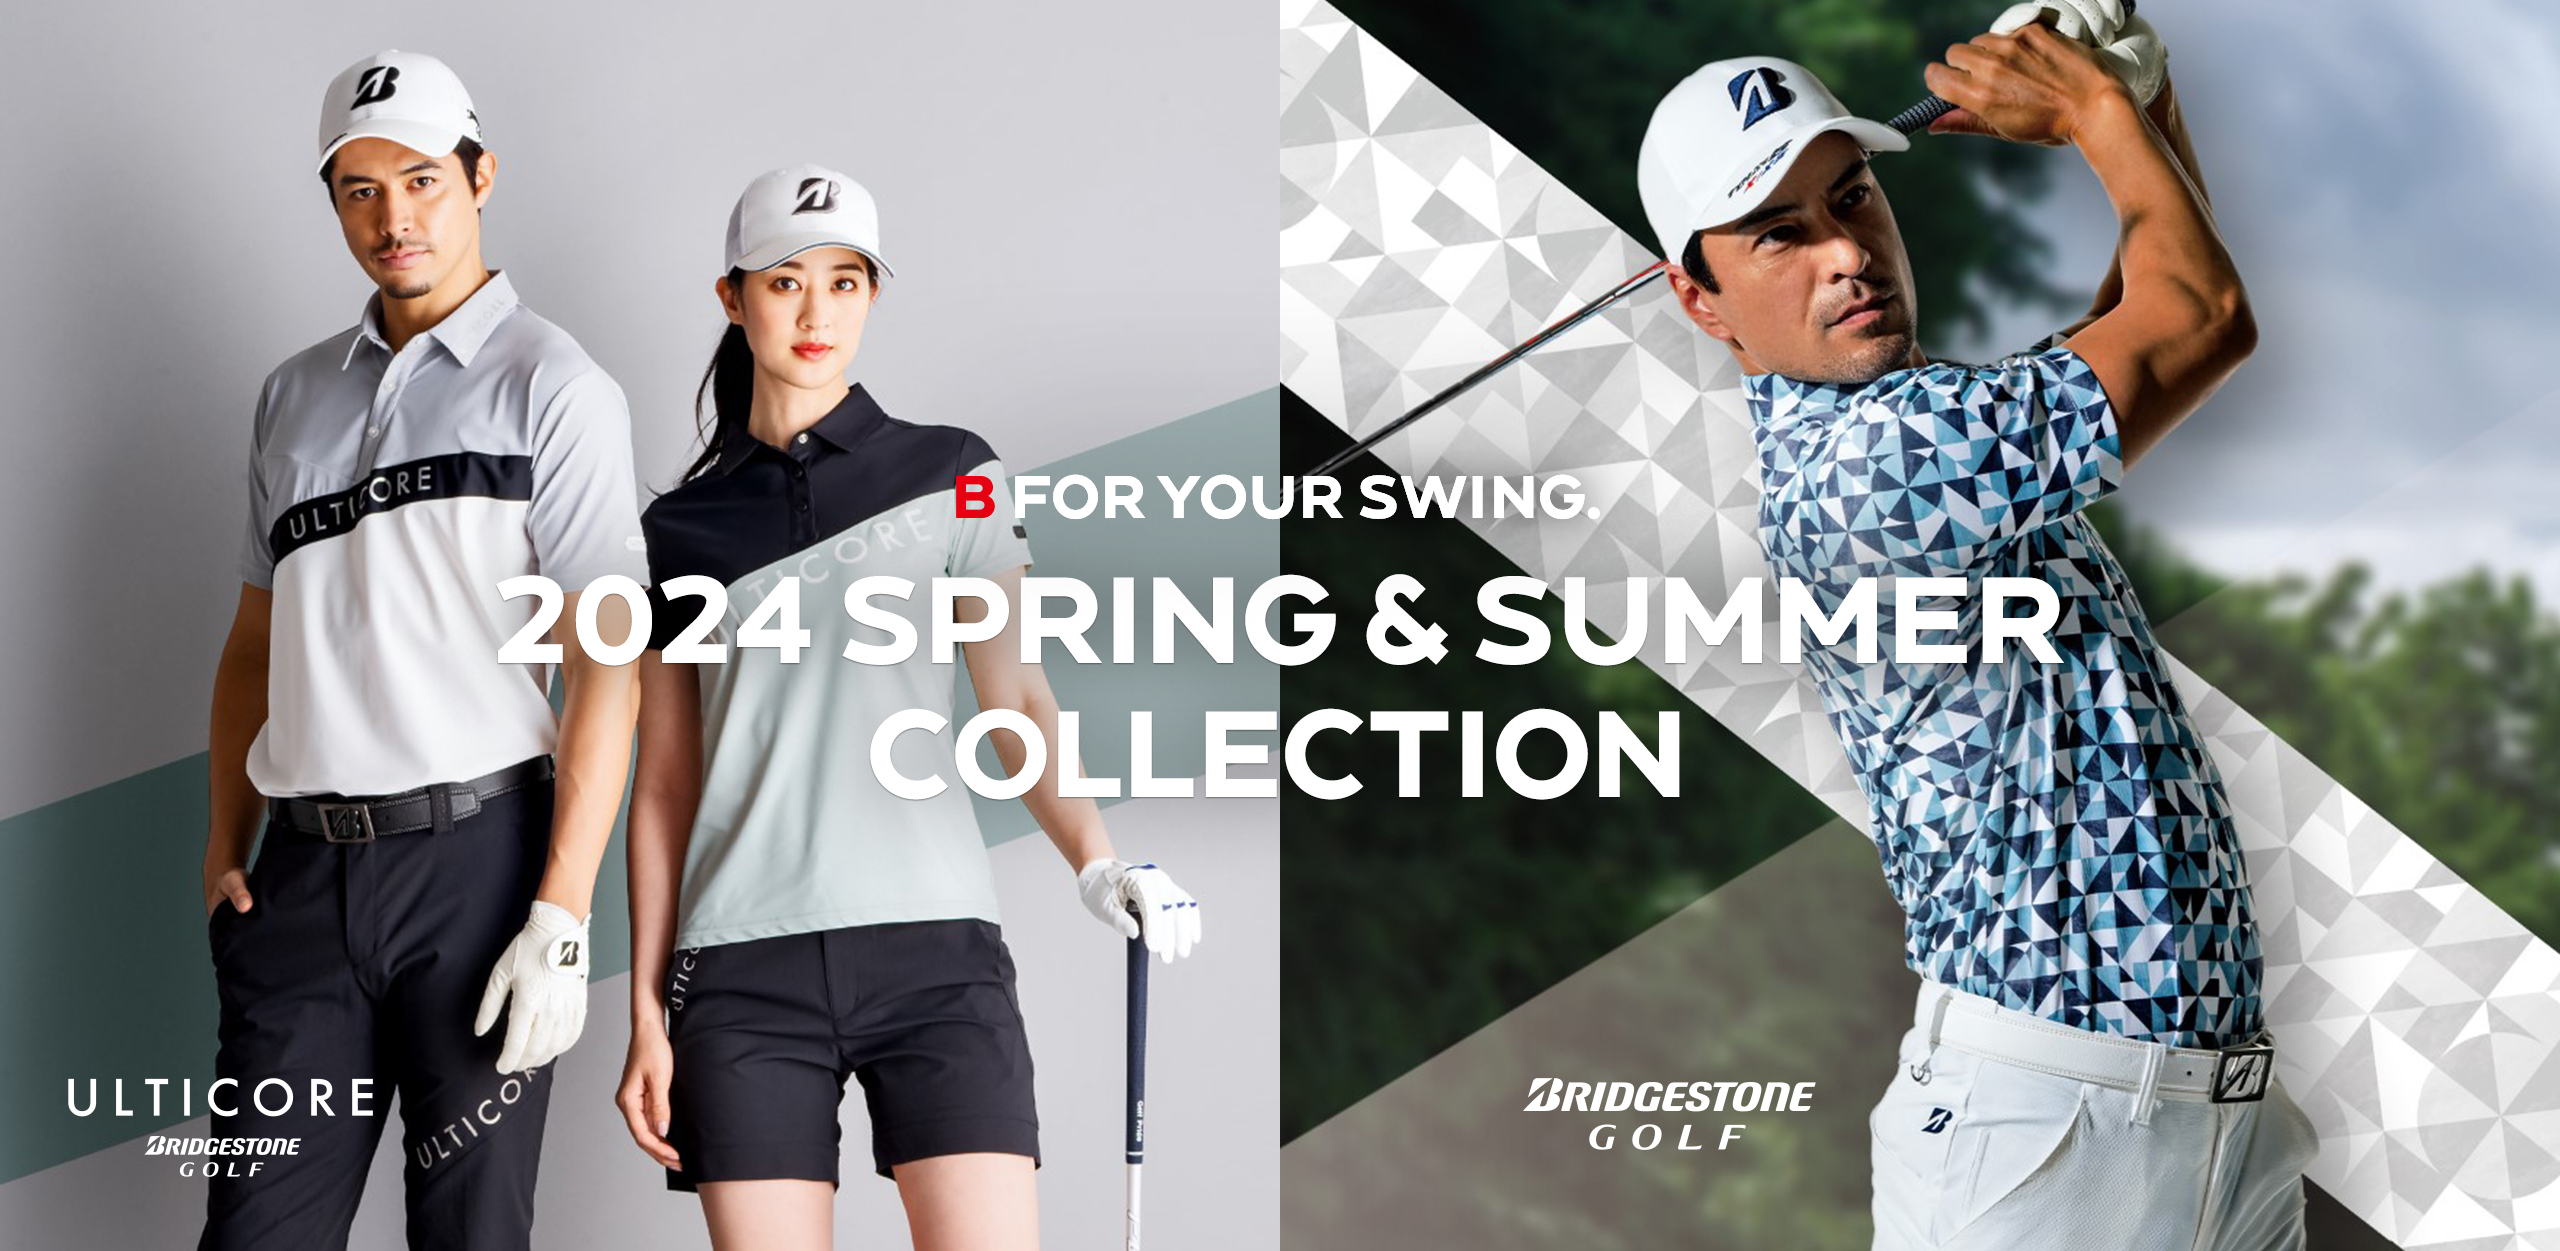 B FOR YOUR SWING. 2024 SPRING & SUMMER COLLECTION